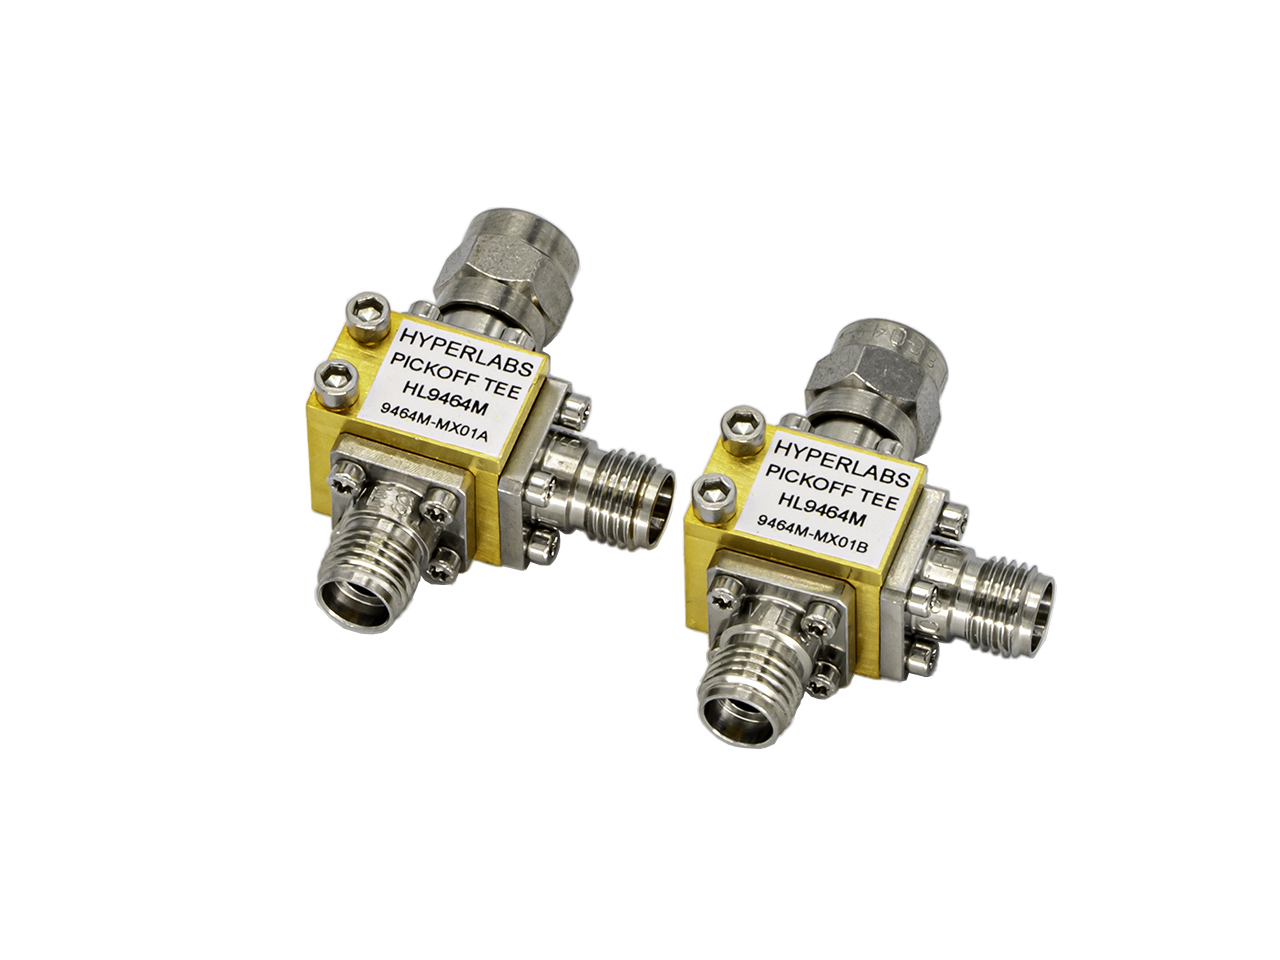 HL9464 Broadband Z-matched Pick-off Tee (DC to 40 GHz)